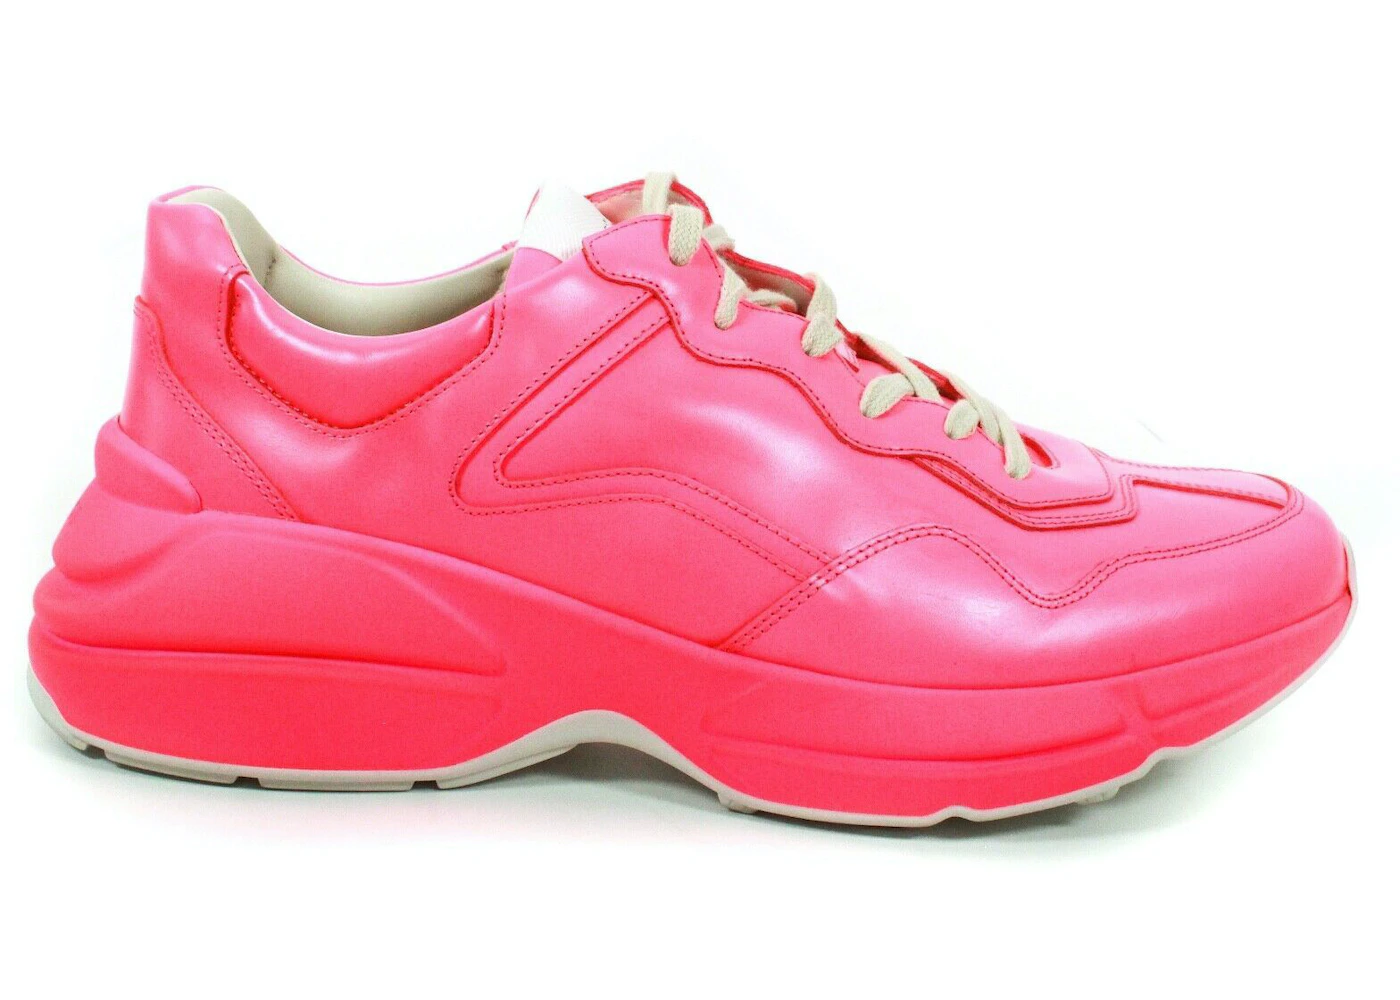 Gucci Pink Shoes | vlr.eng.br